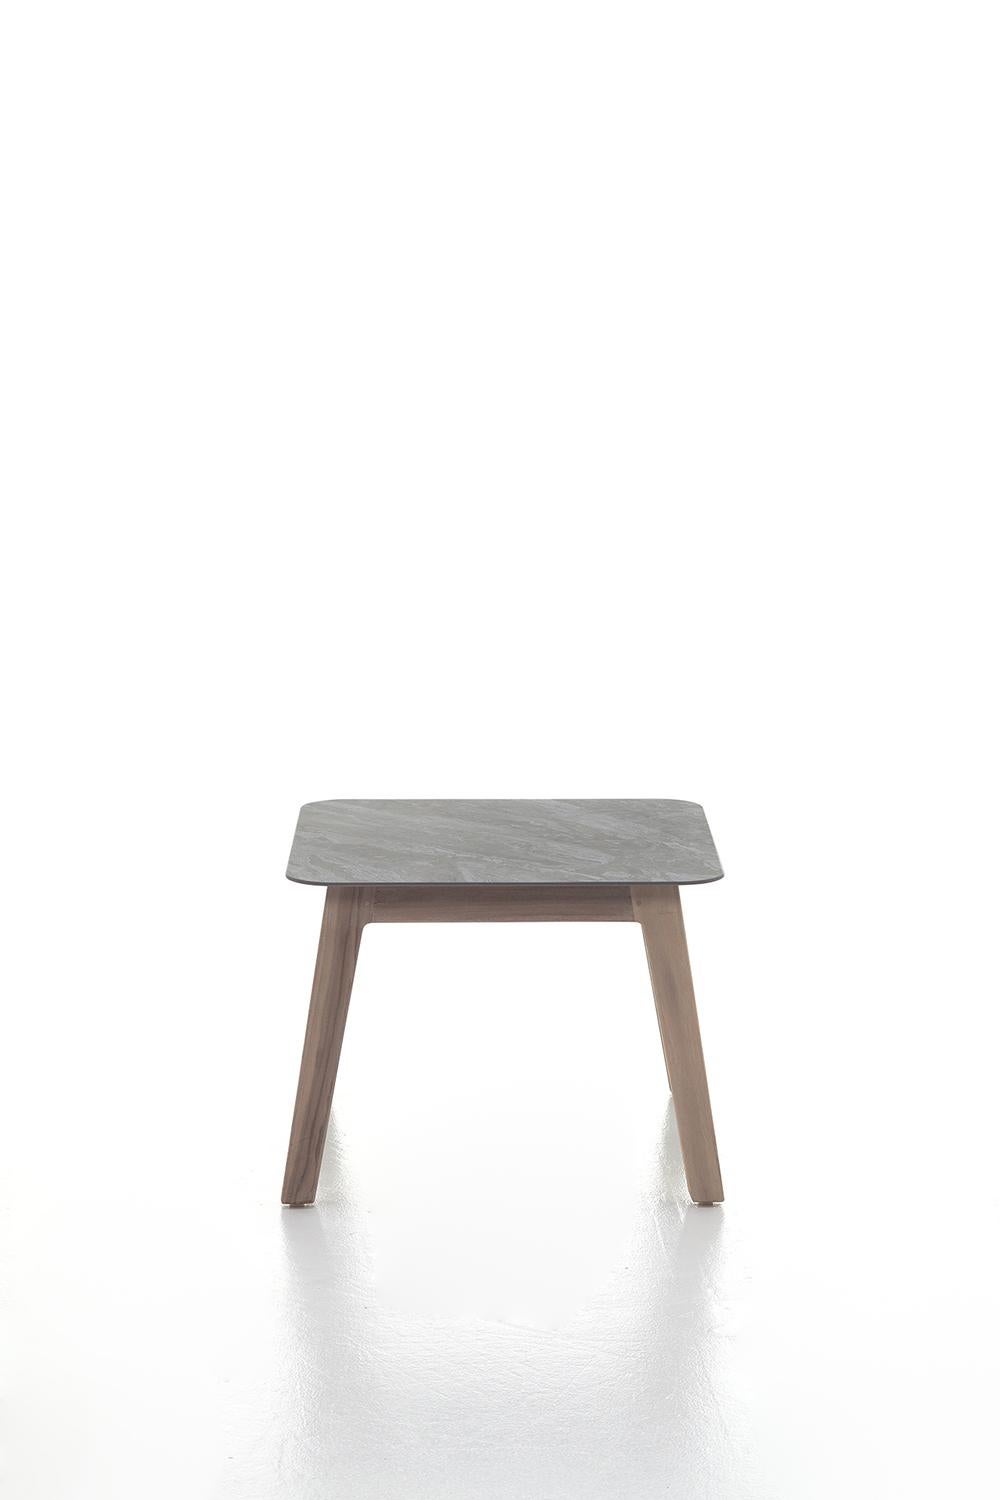 Modern Gervasoni Inout 868 Coffee Table in Grey Porcelain Stoneware Top and Washed Teak For Sale